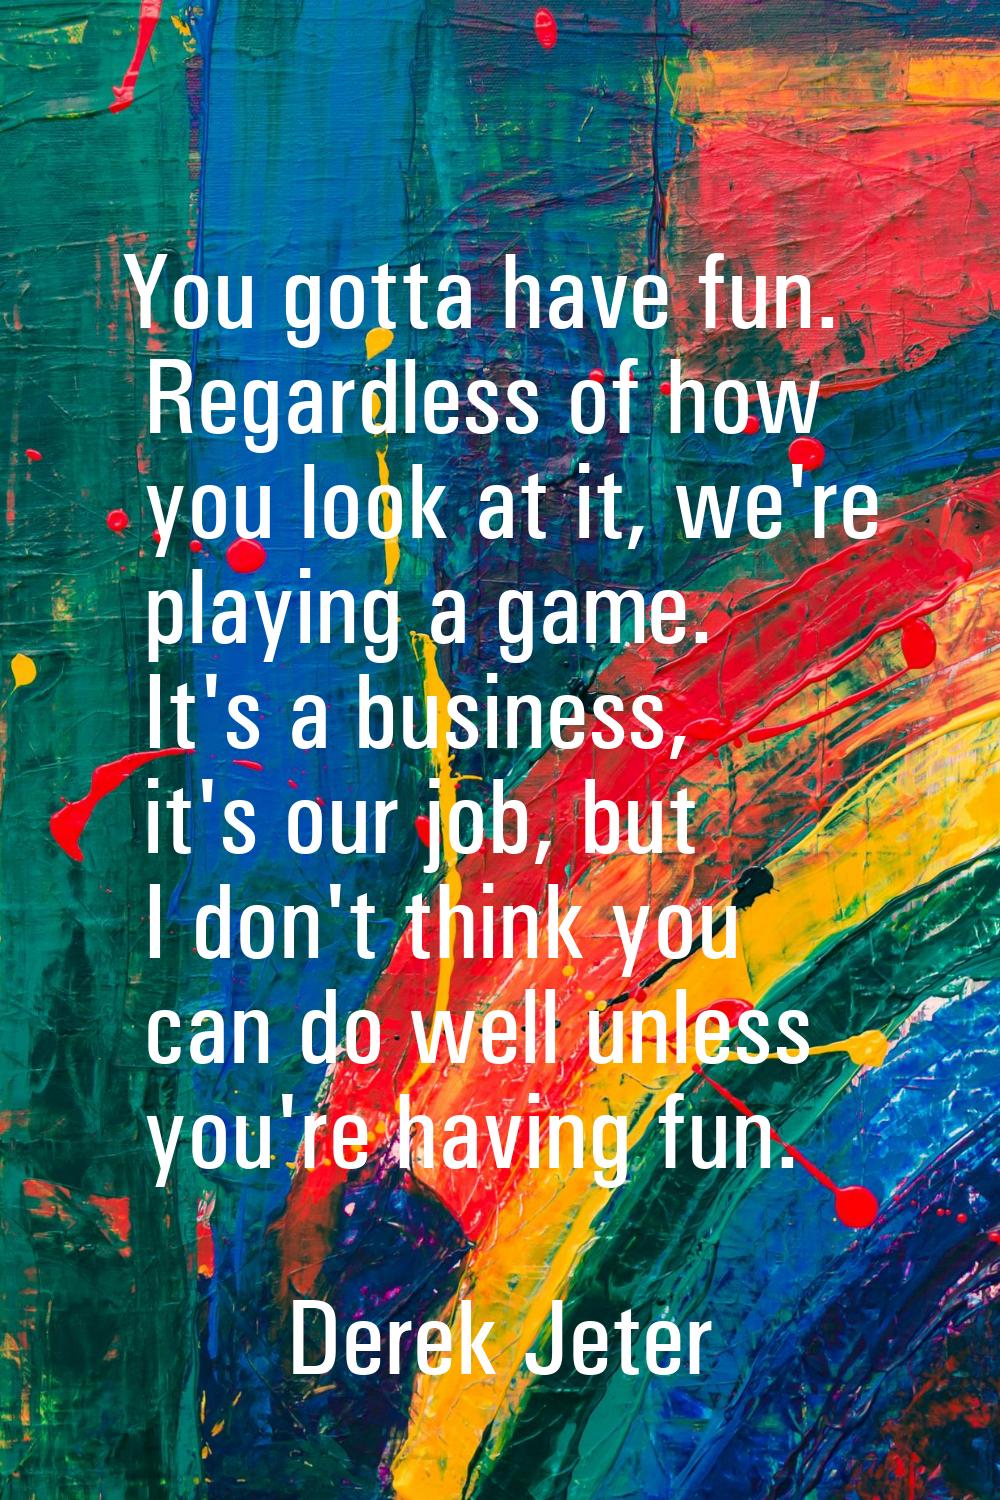 You gotta have fun. Regardless of how you look at it, we're playing a game. It's a business, it's o